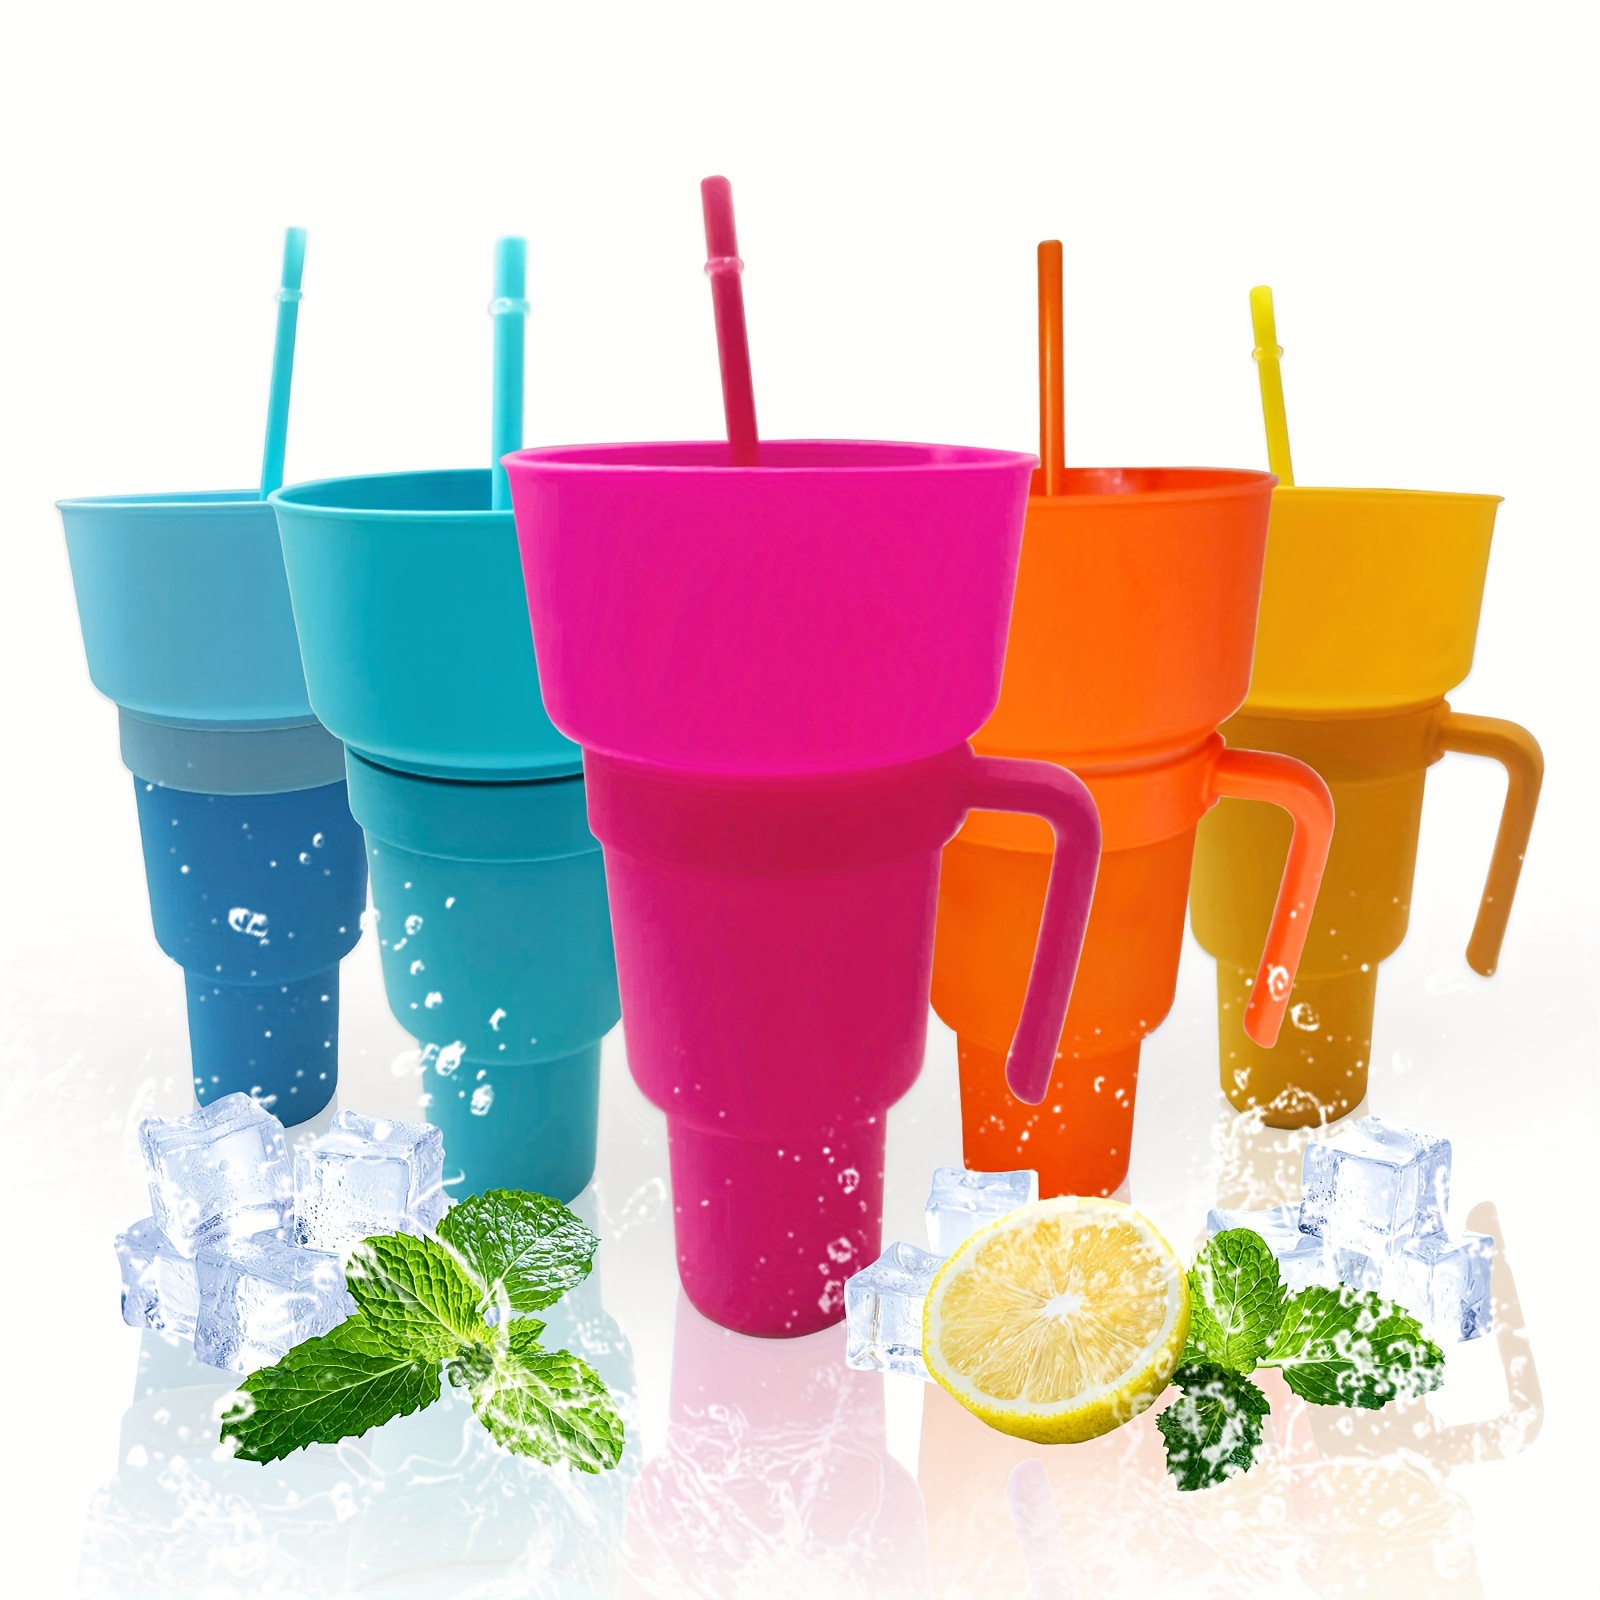 Snack Cup 2 in 1 Multifunction Color Changing Stadium Tumbler Snack and  Drink Cup with Straw for Movies Home Use